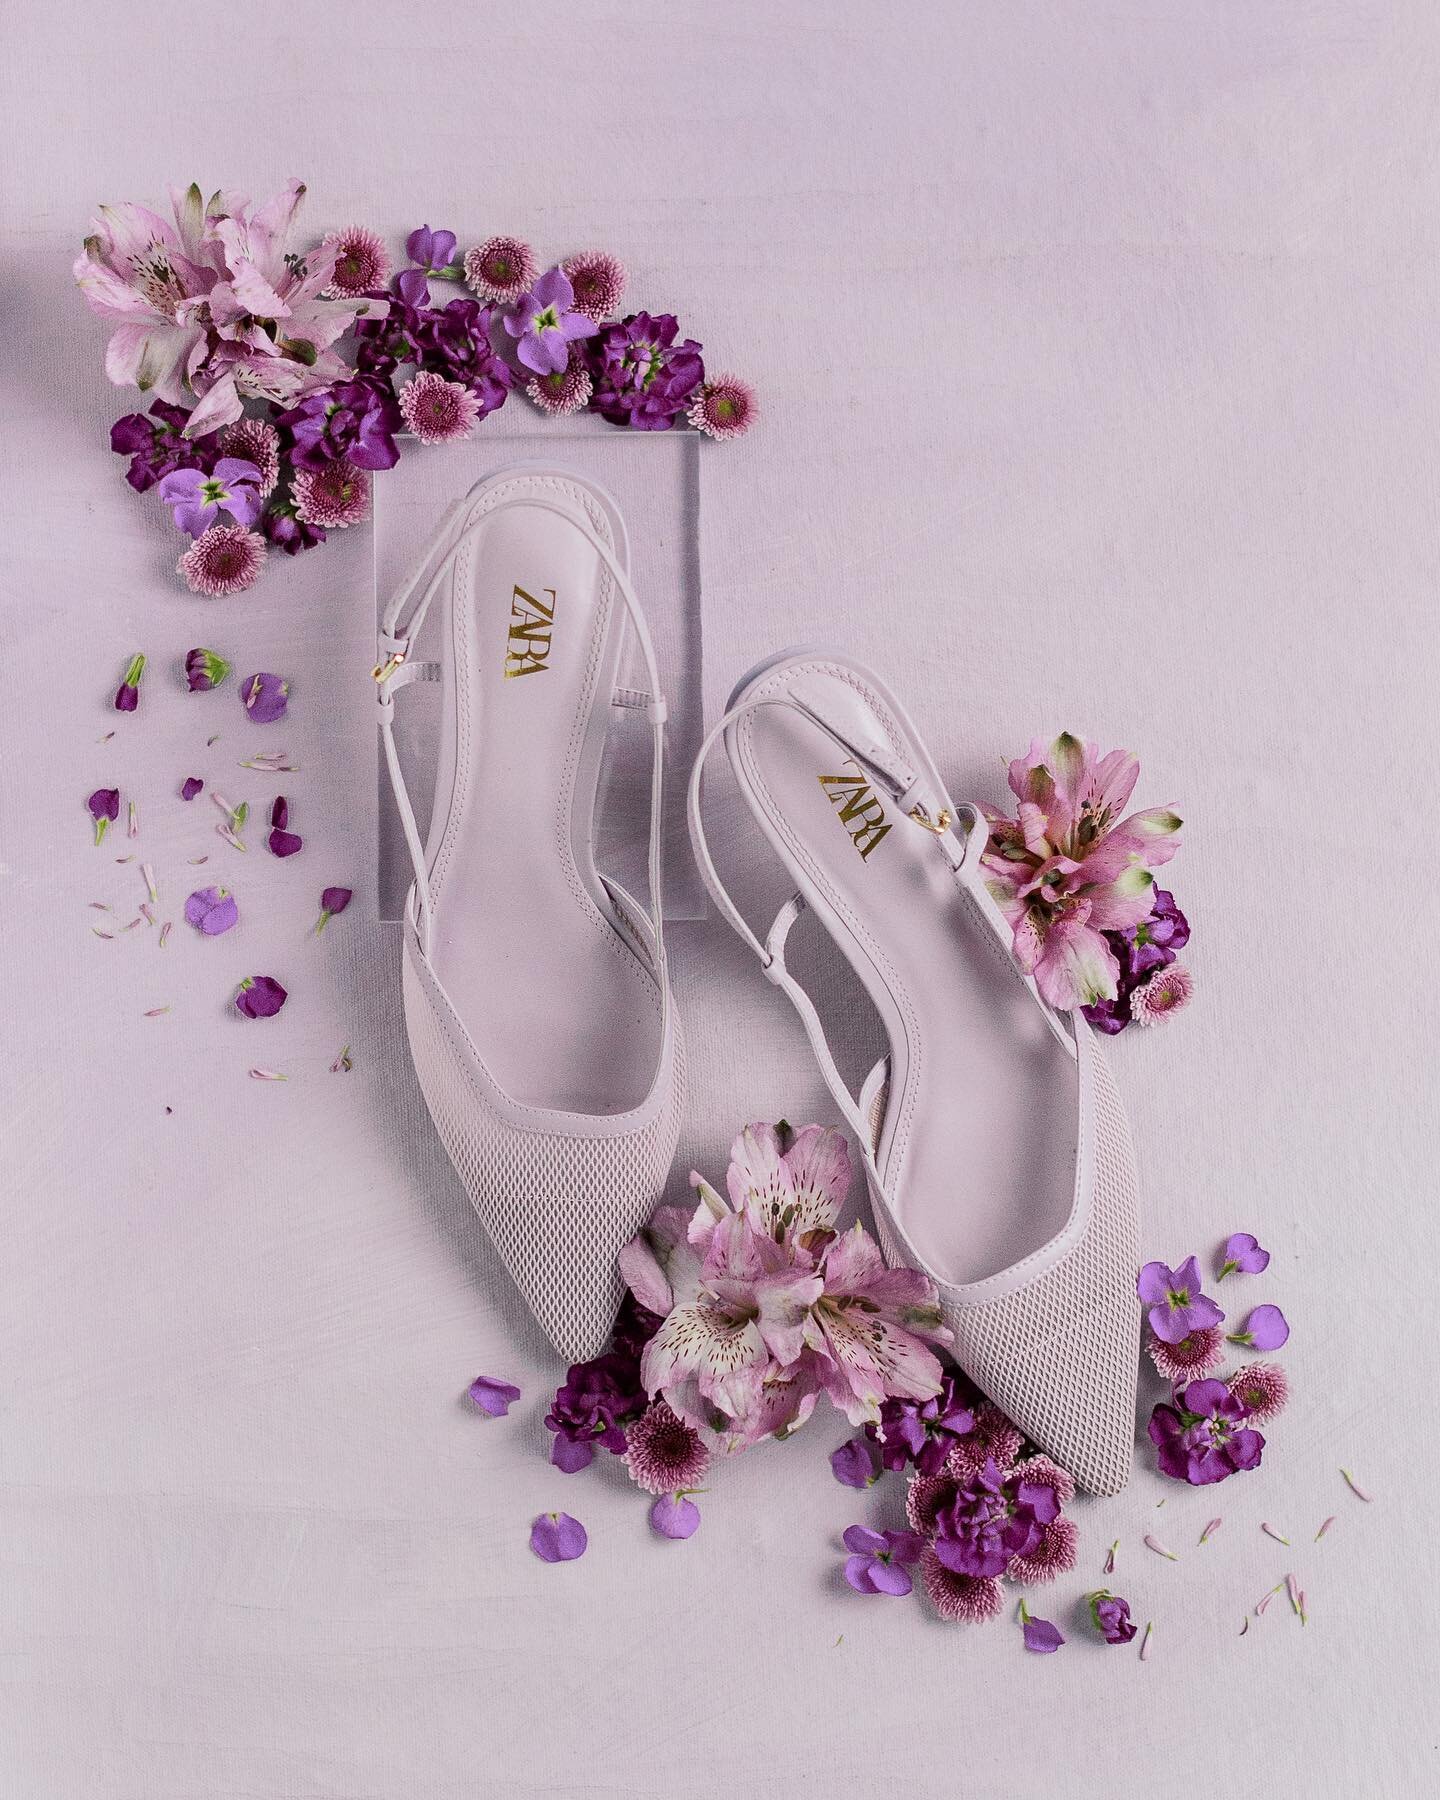 SHOES, omg, shoes....who remembers that song/video? It always pops up in my head! 
If you know me (EM) you know I love a good pair of shoes! I truly believe shoes can make or break an outfit and your wedding shoes are no exception! If you haven&rsquo